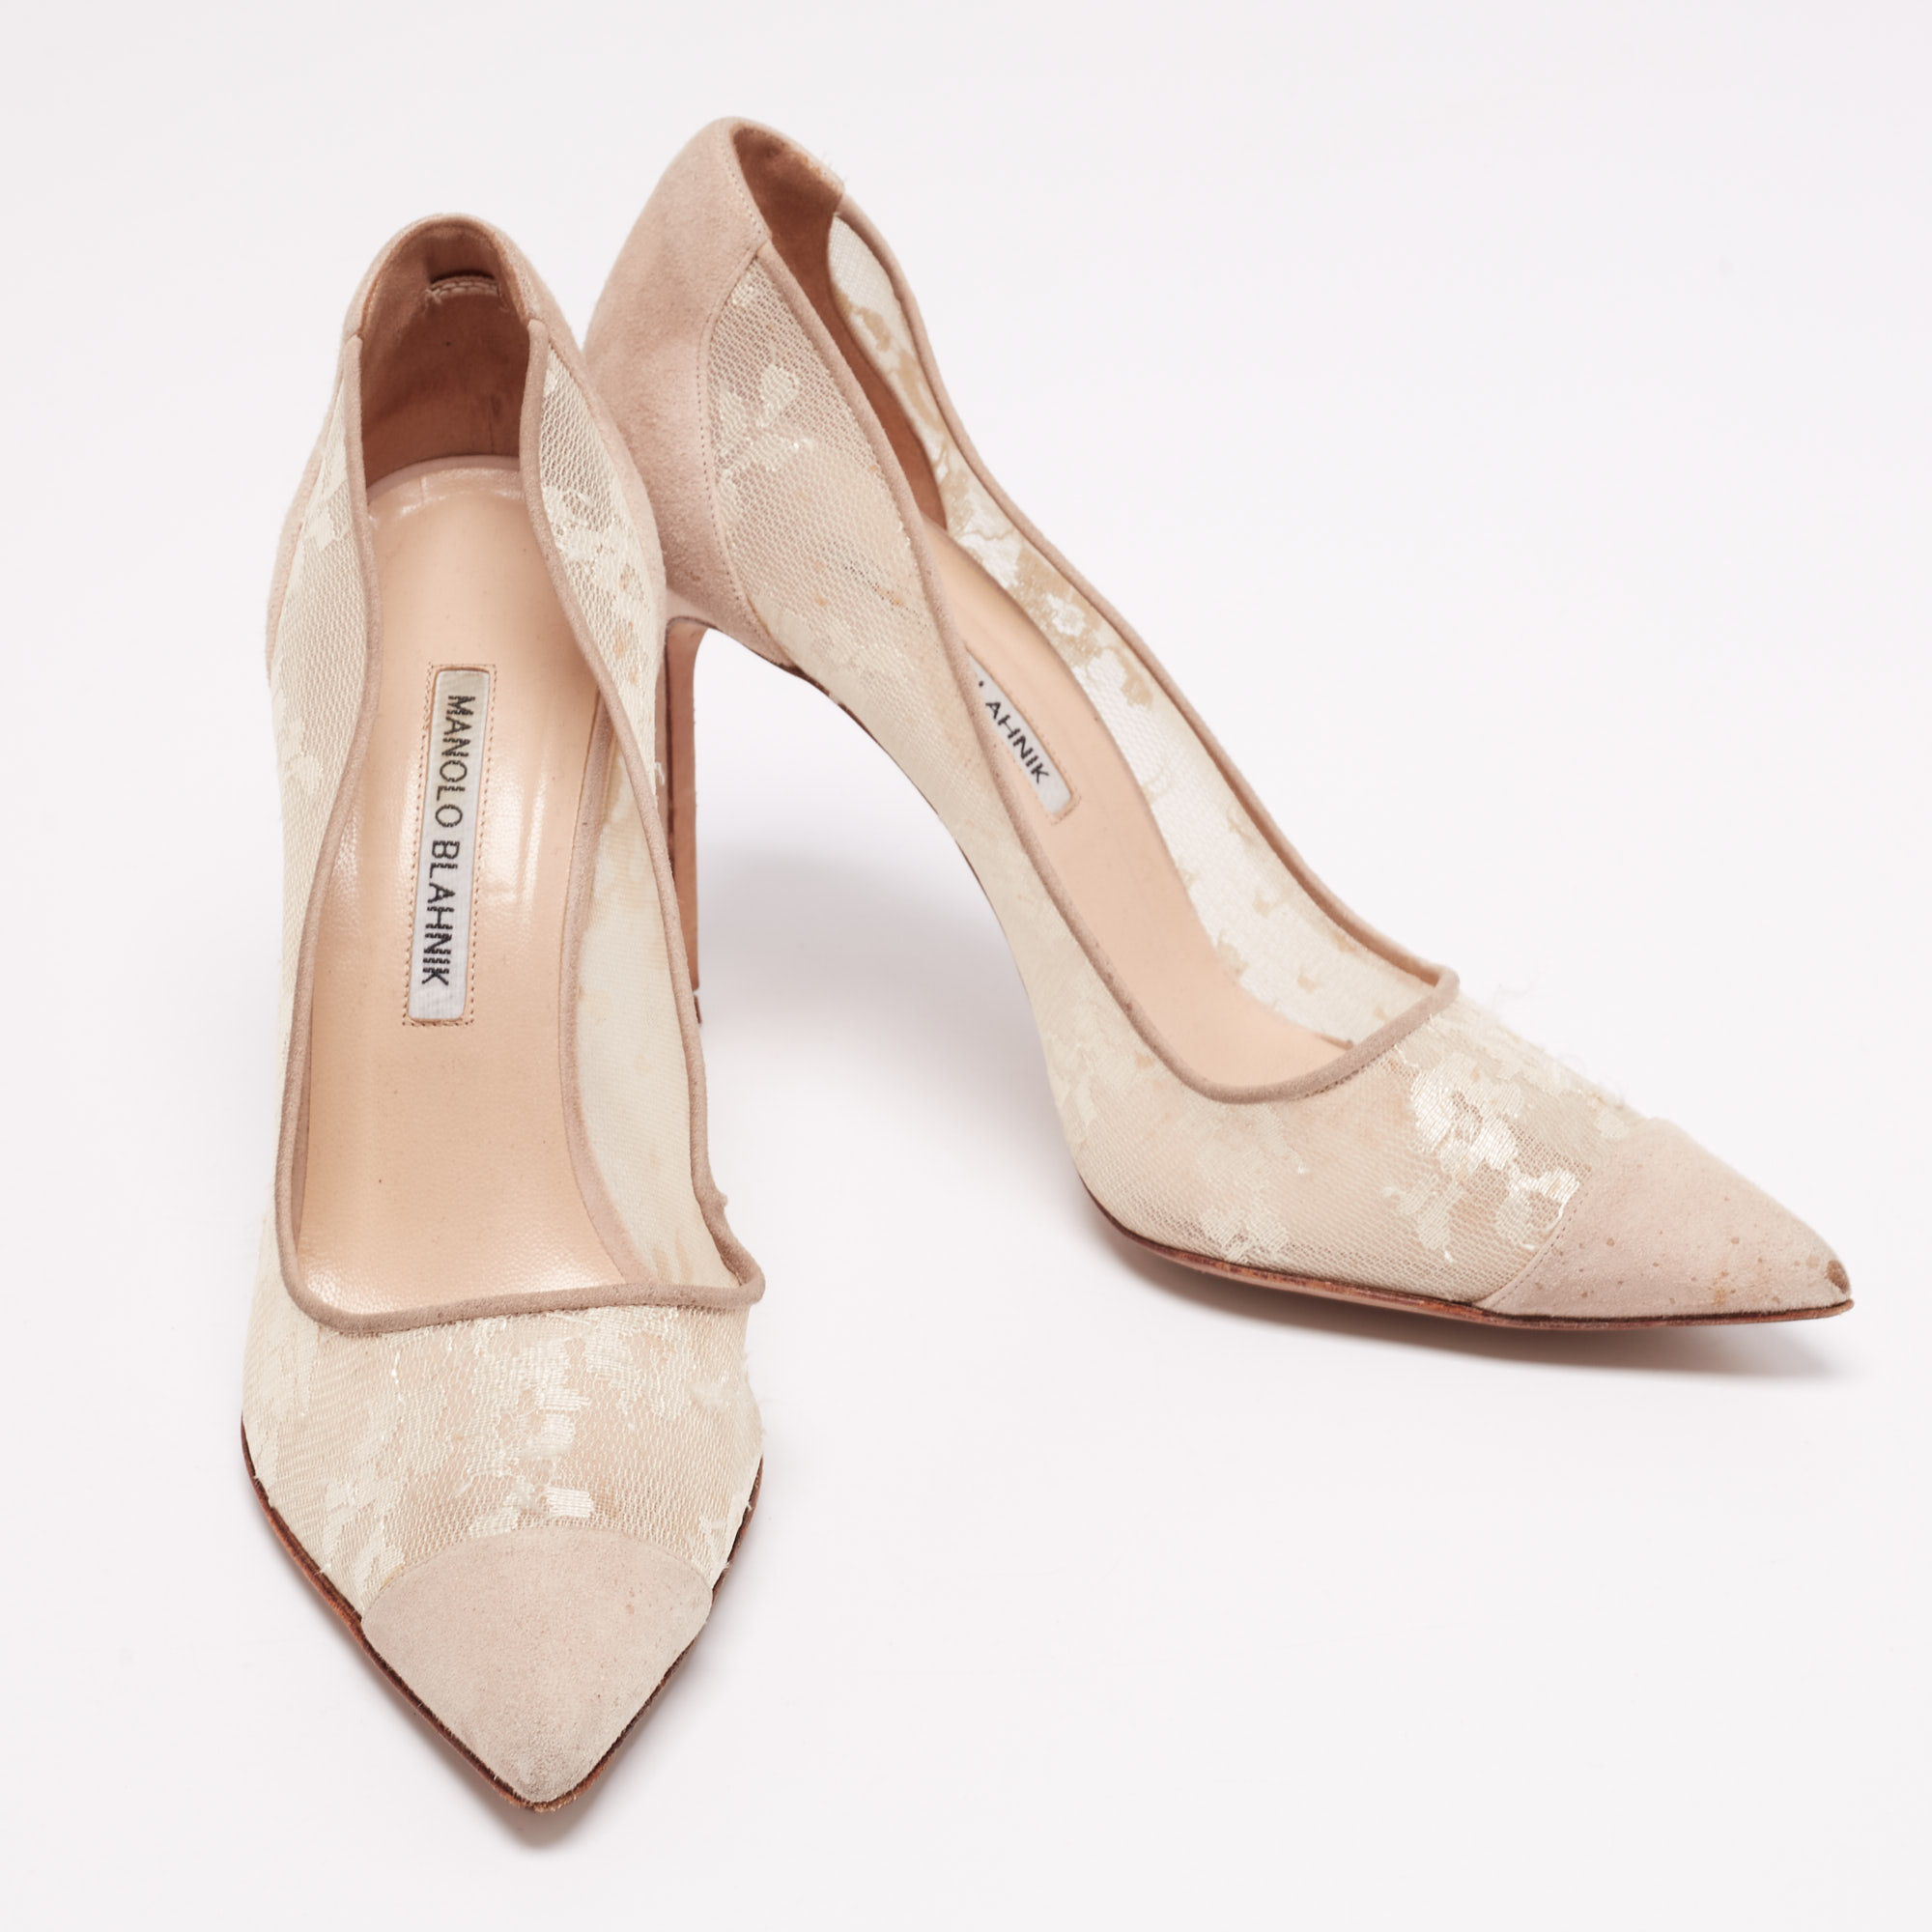 Manolo Blahnik Beige Suede And Lace Pointed-Toe Pumps Size 40